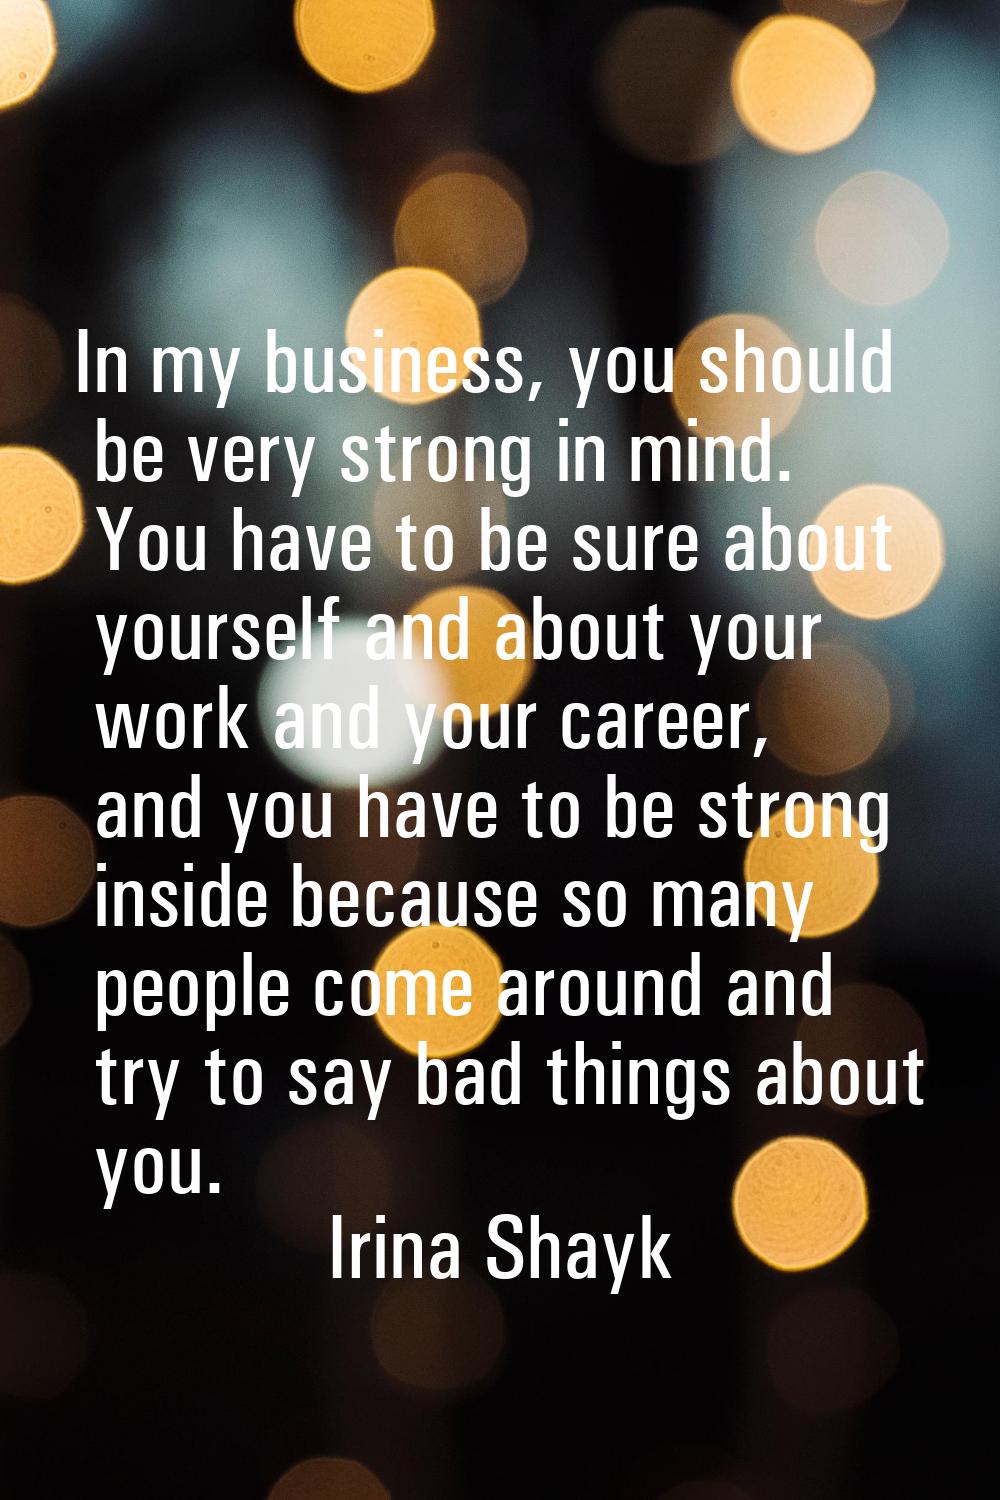 In my business, you should be very strong in mind. You have to be sure about yourself and about you